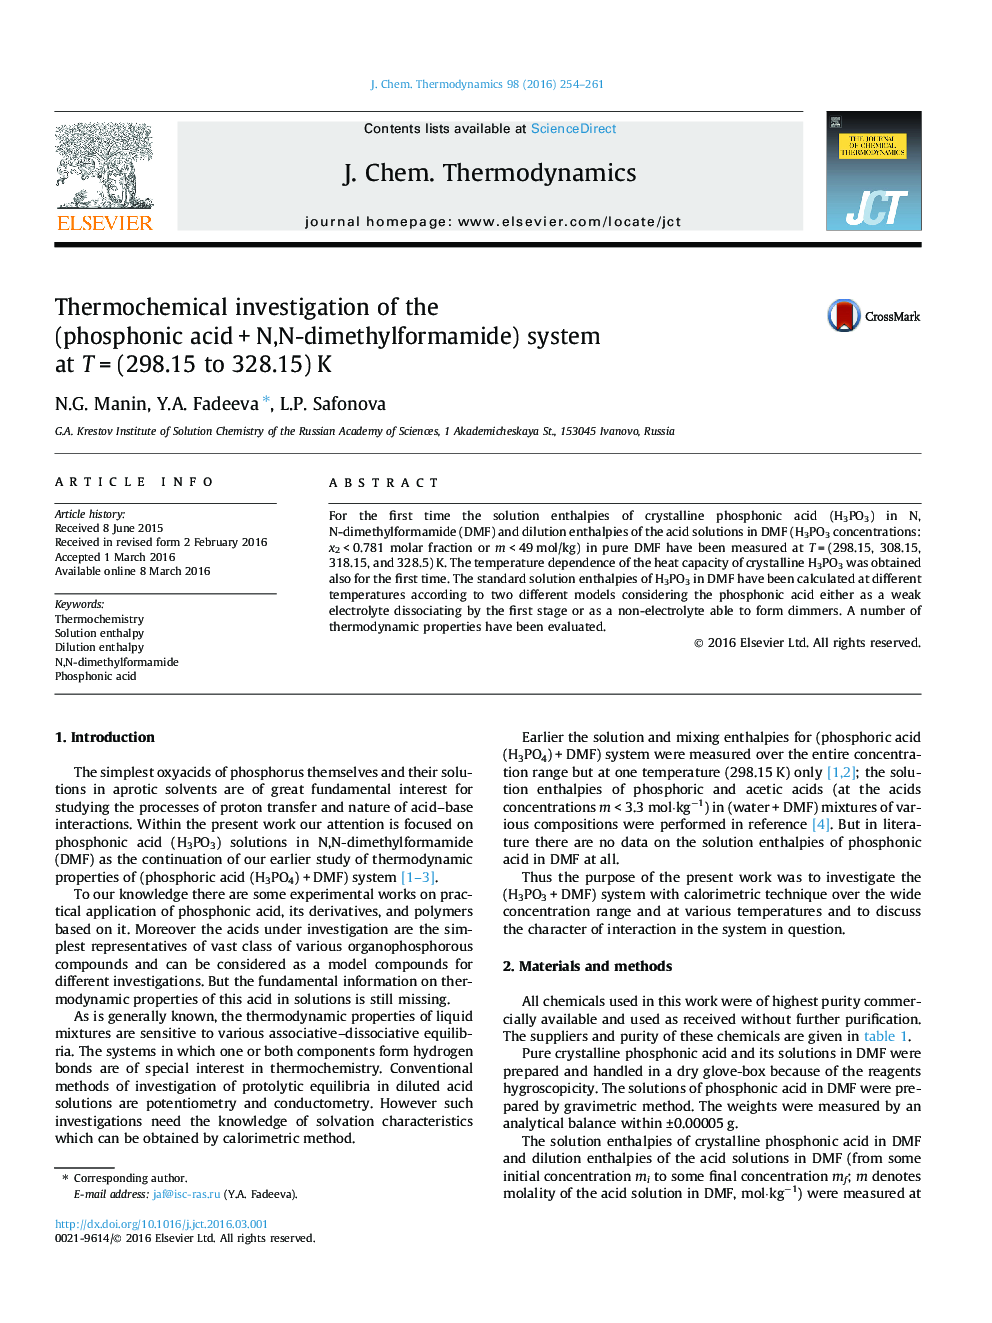 Thermochemical investigation of the (phosphonic acid + N,N-dimethylformamide) system at T = (298.15 to 328.15) K